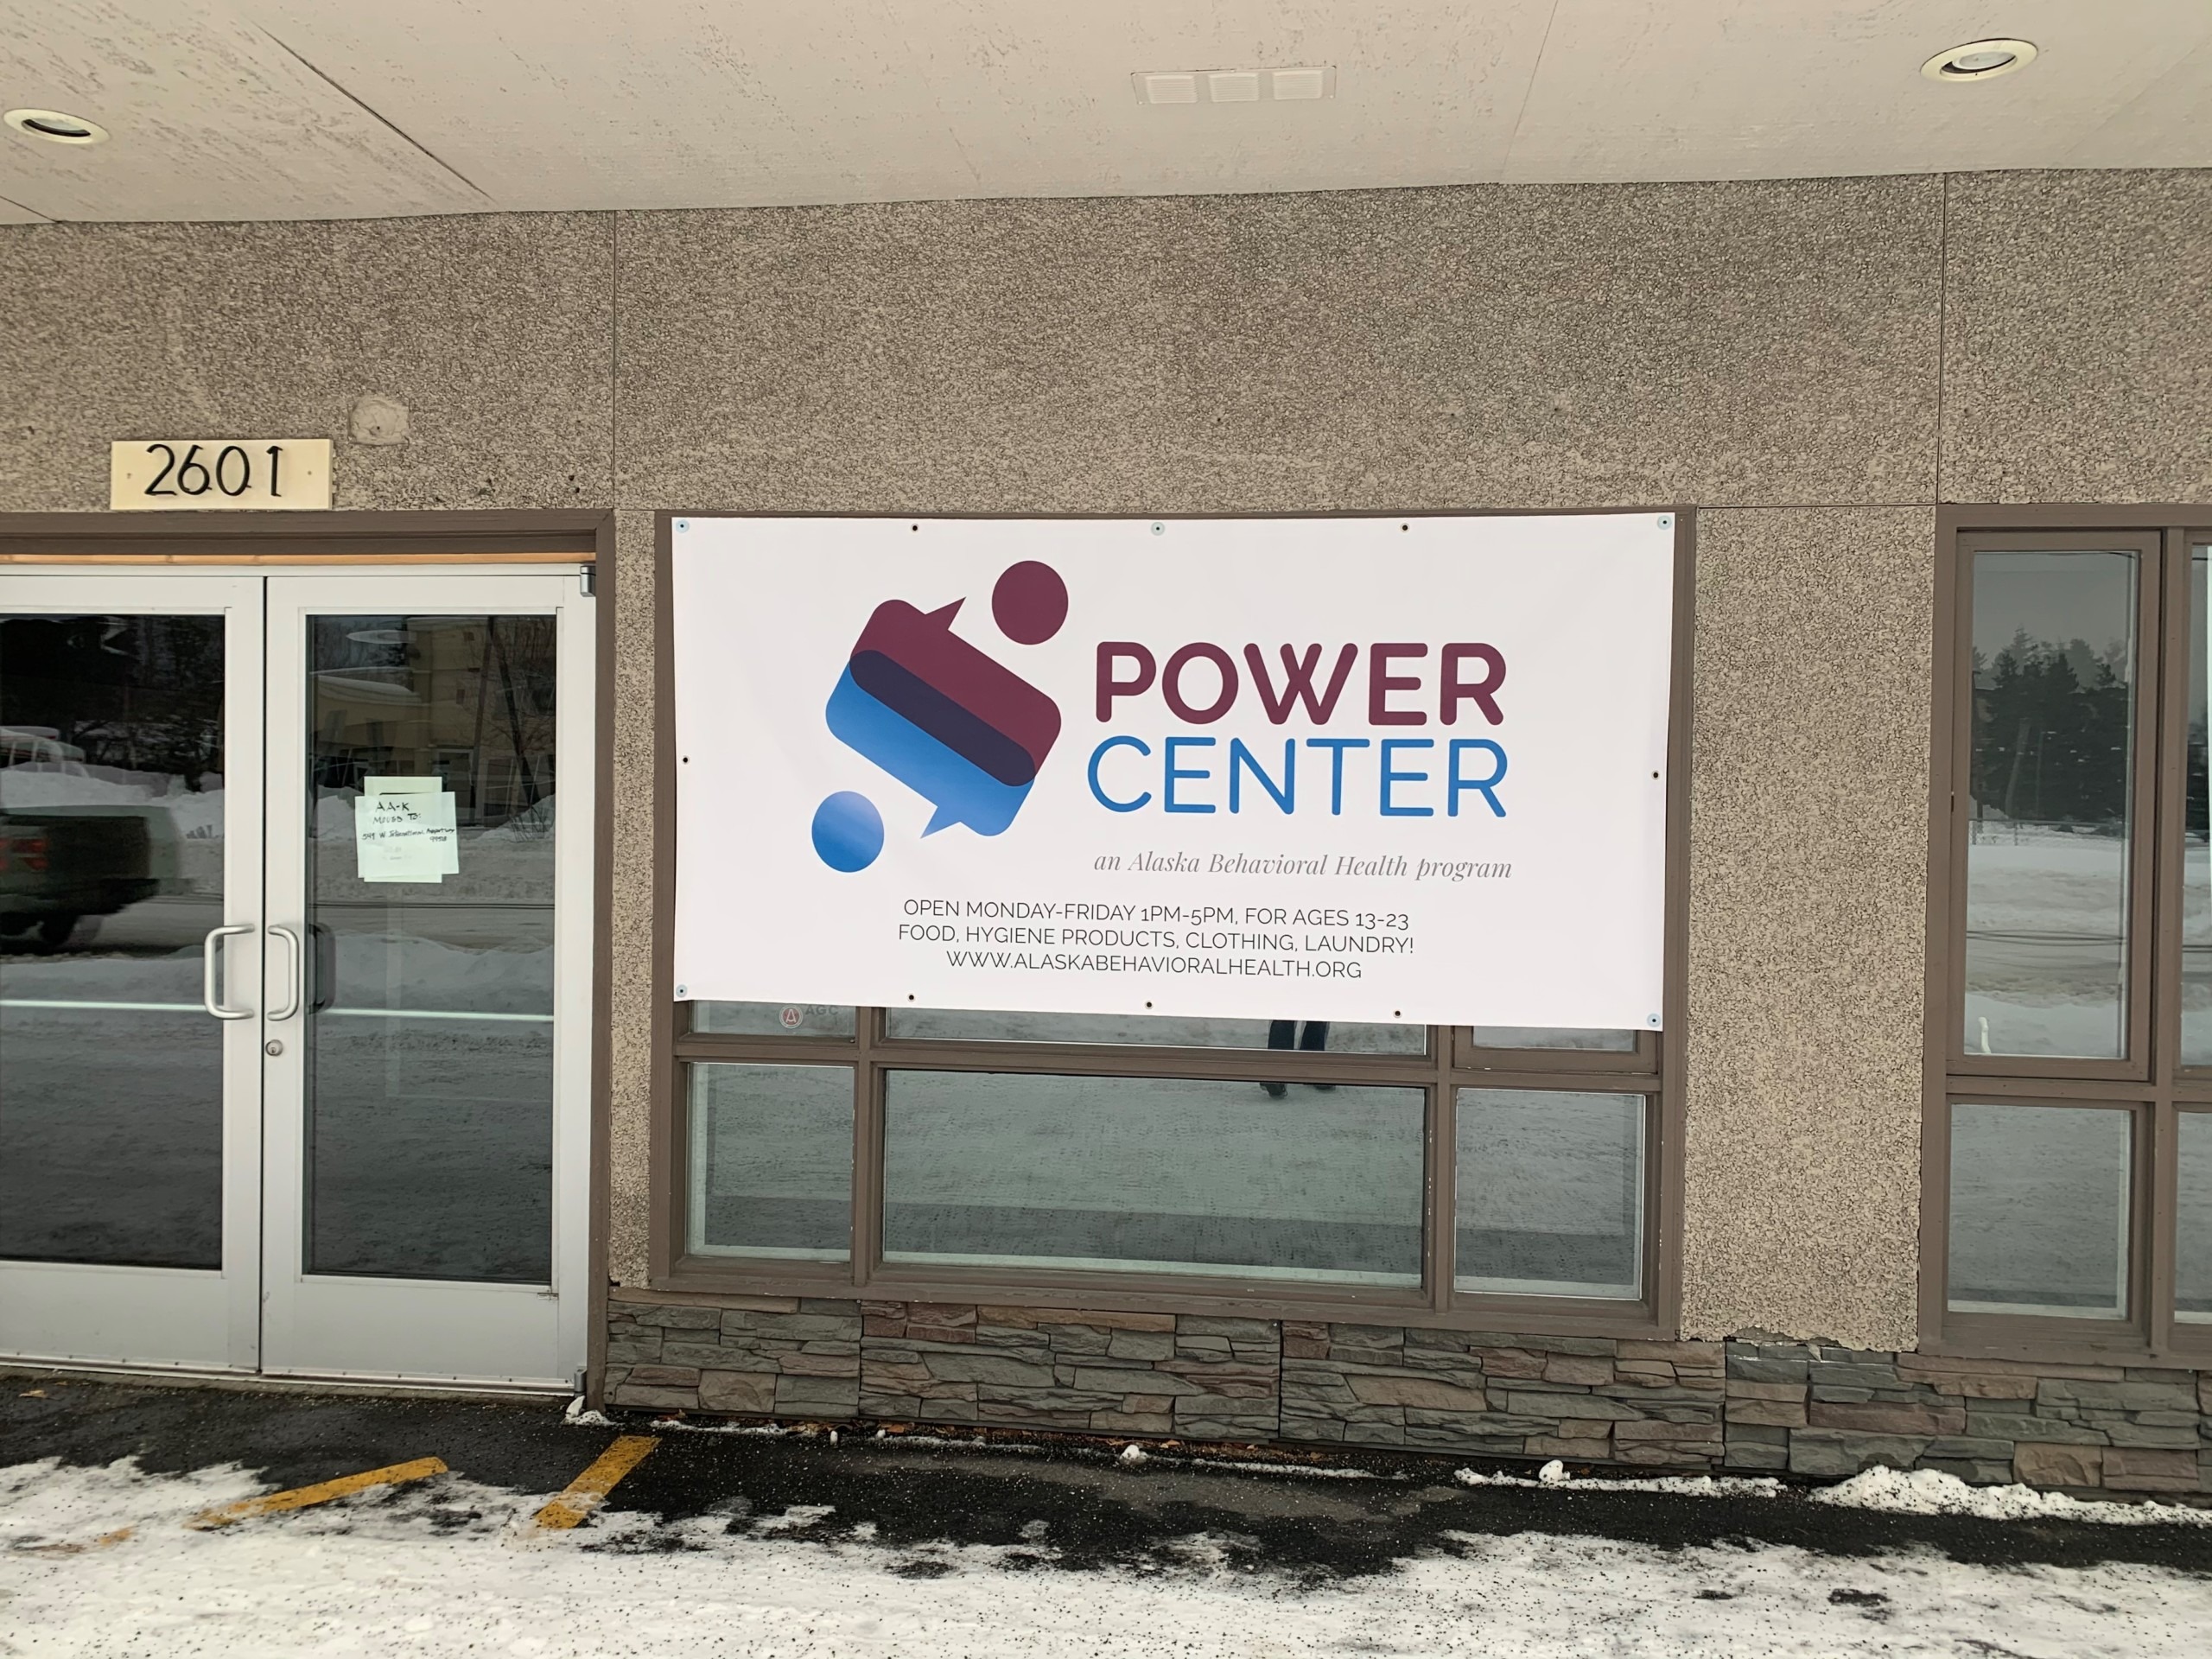 banner on building reads "Power Center"